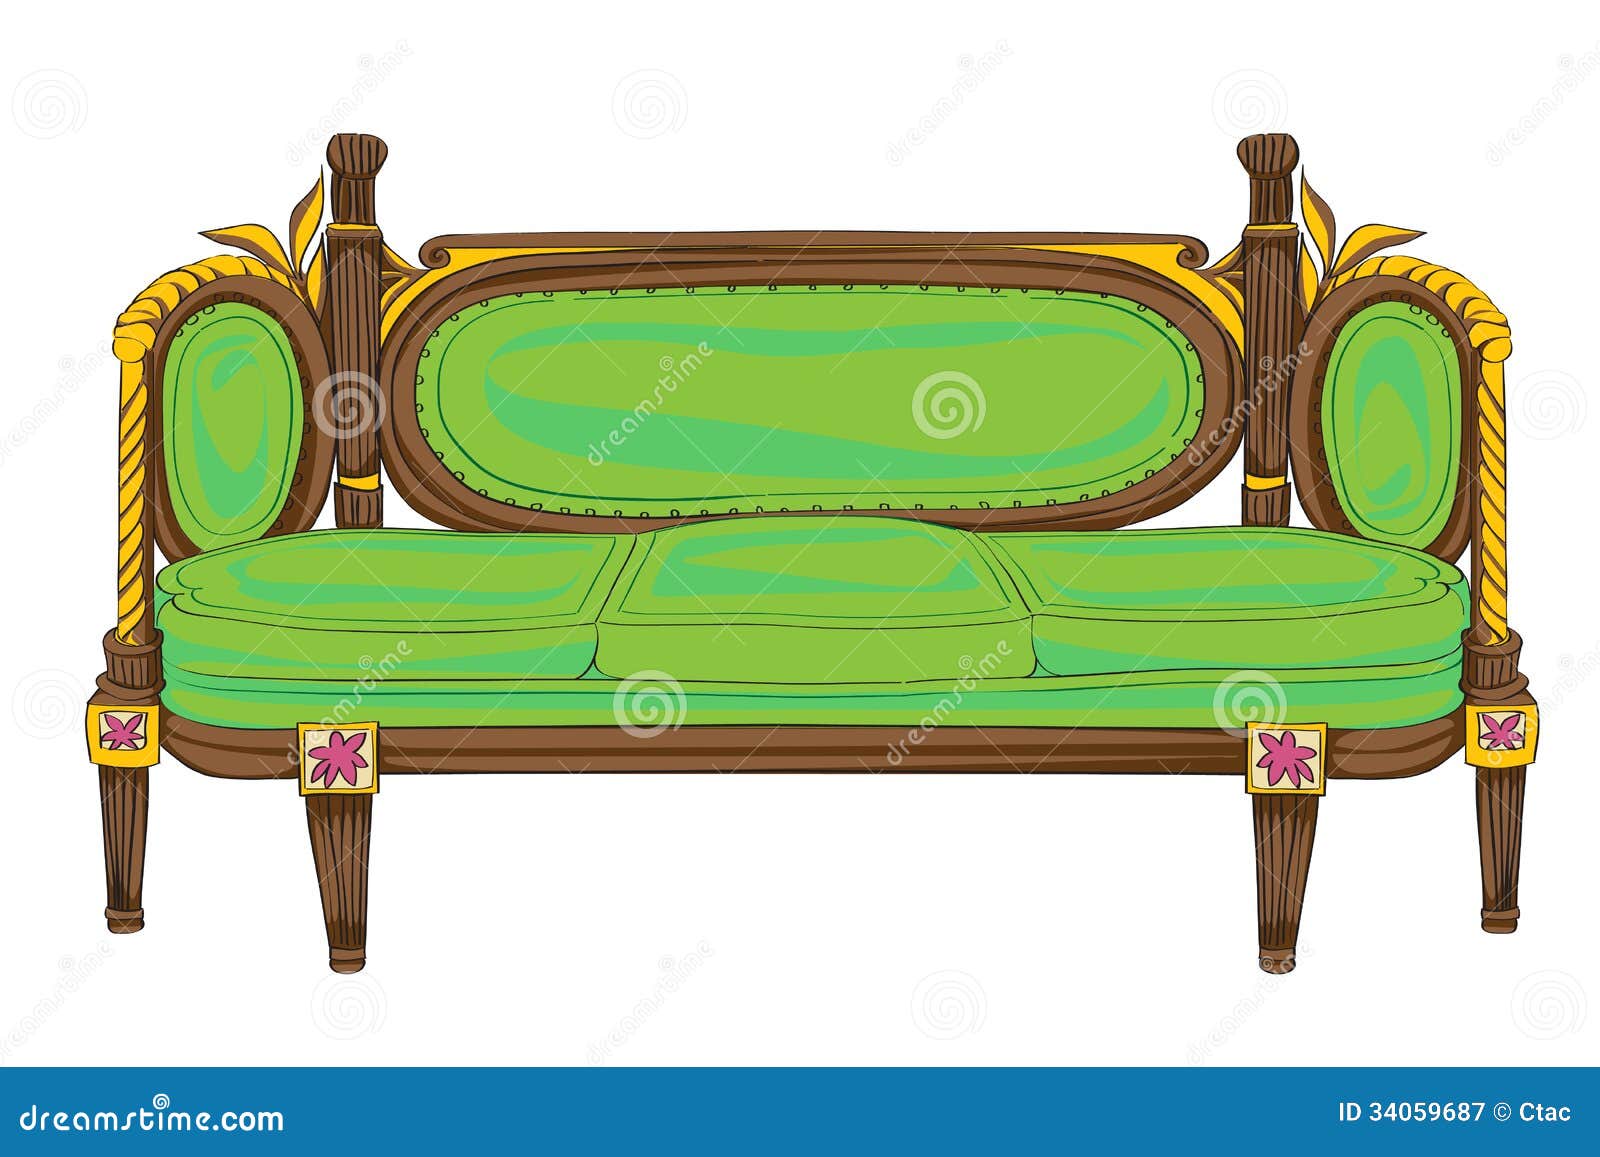 Classical Sofa On White Royalty Free Stock Photography - Image: 34059687